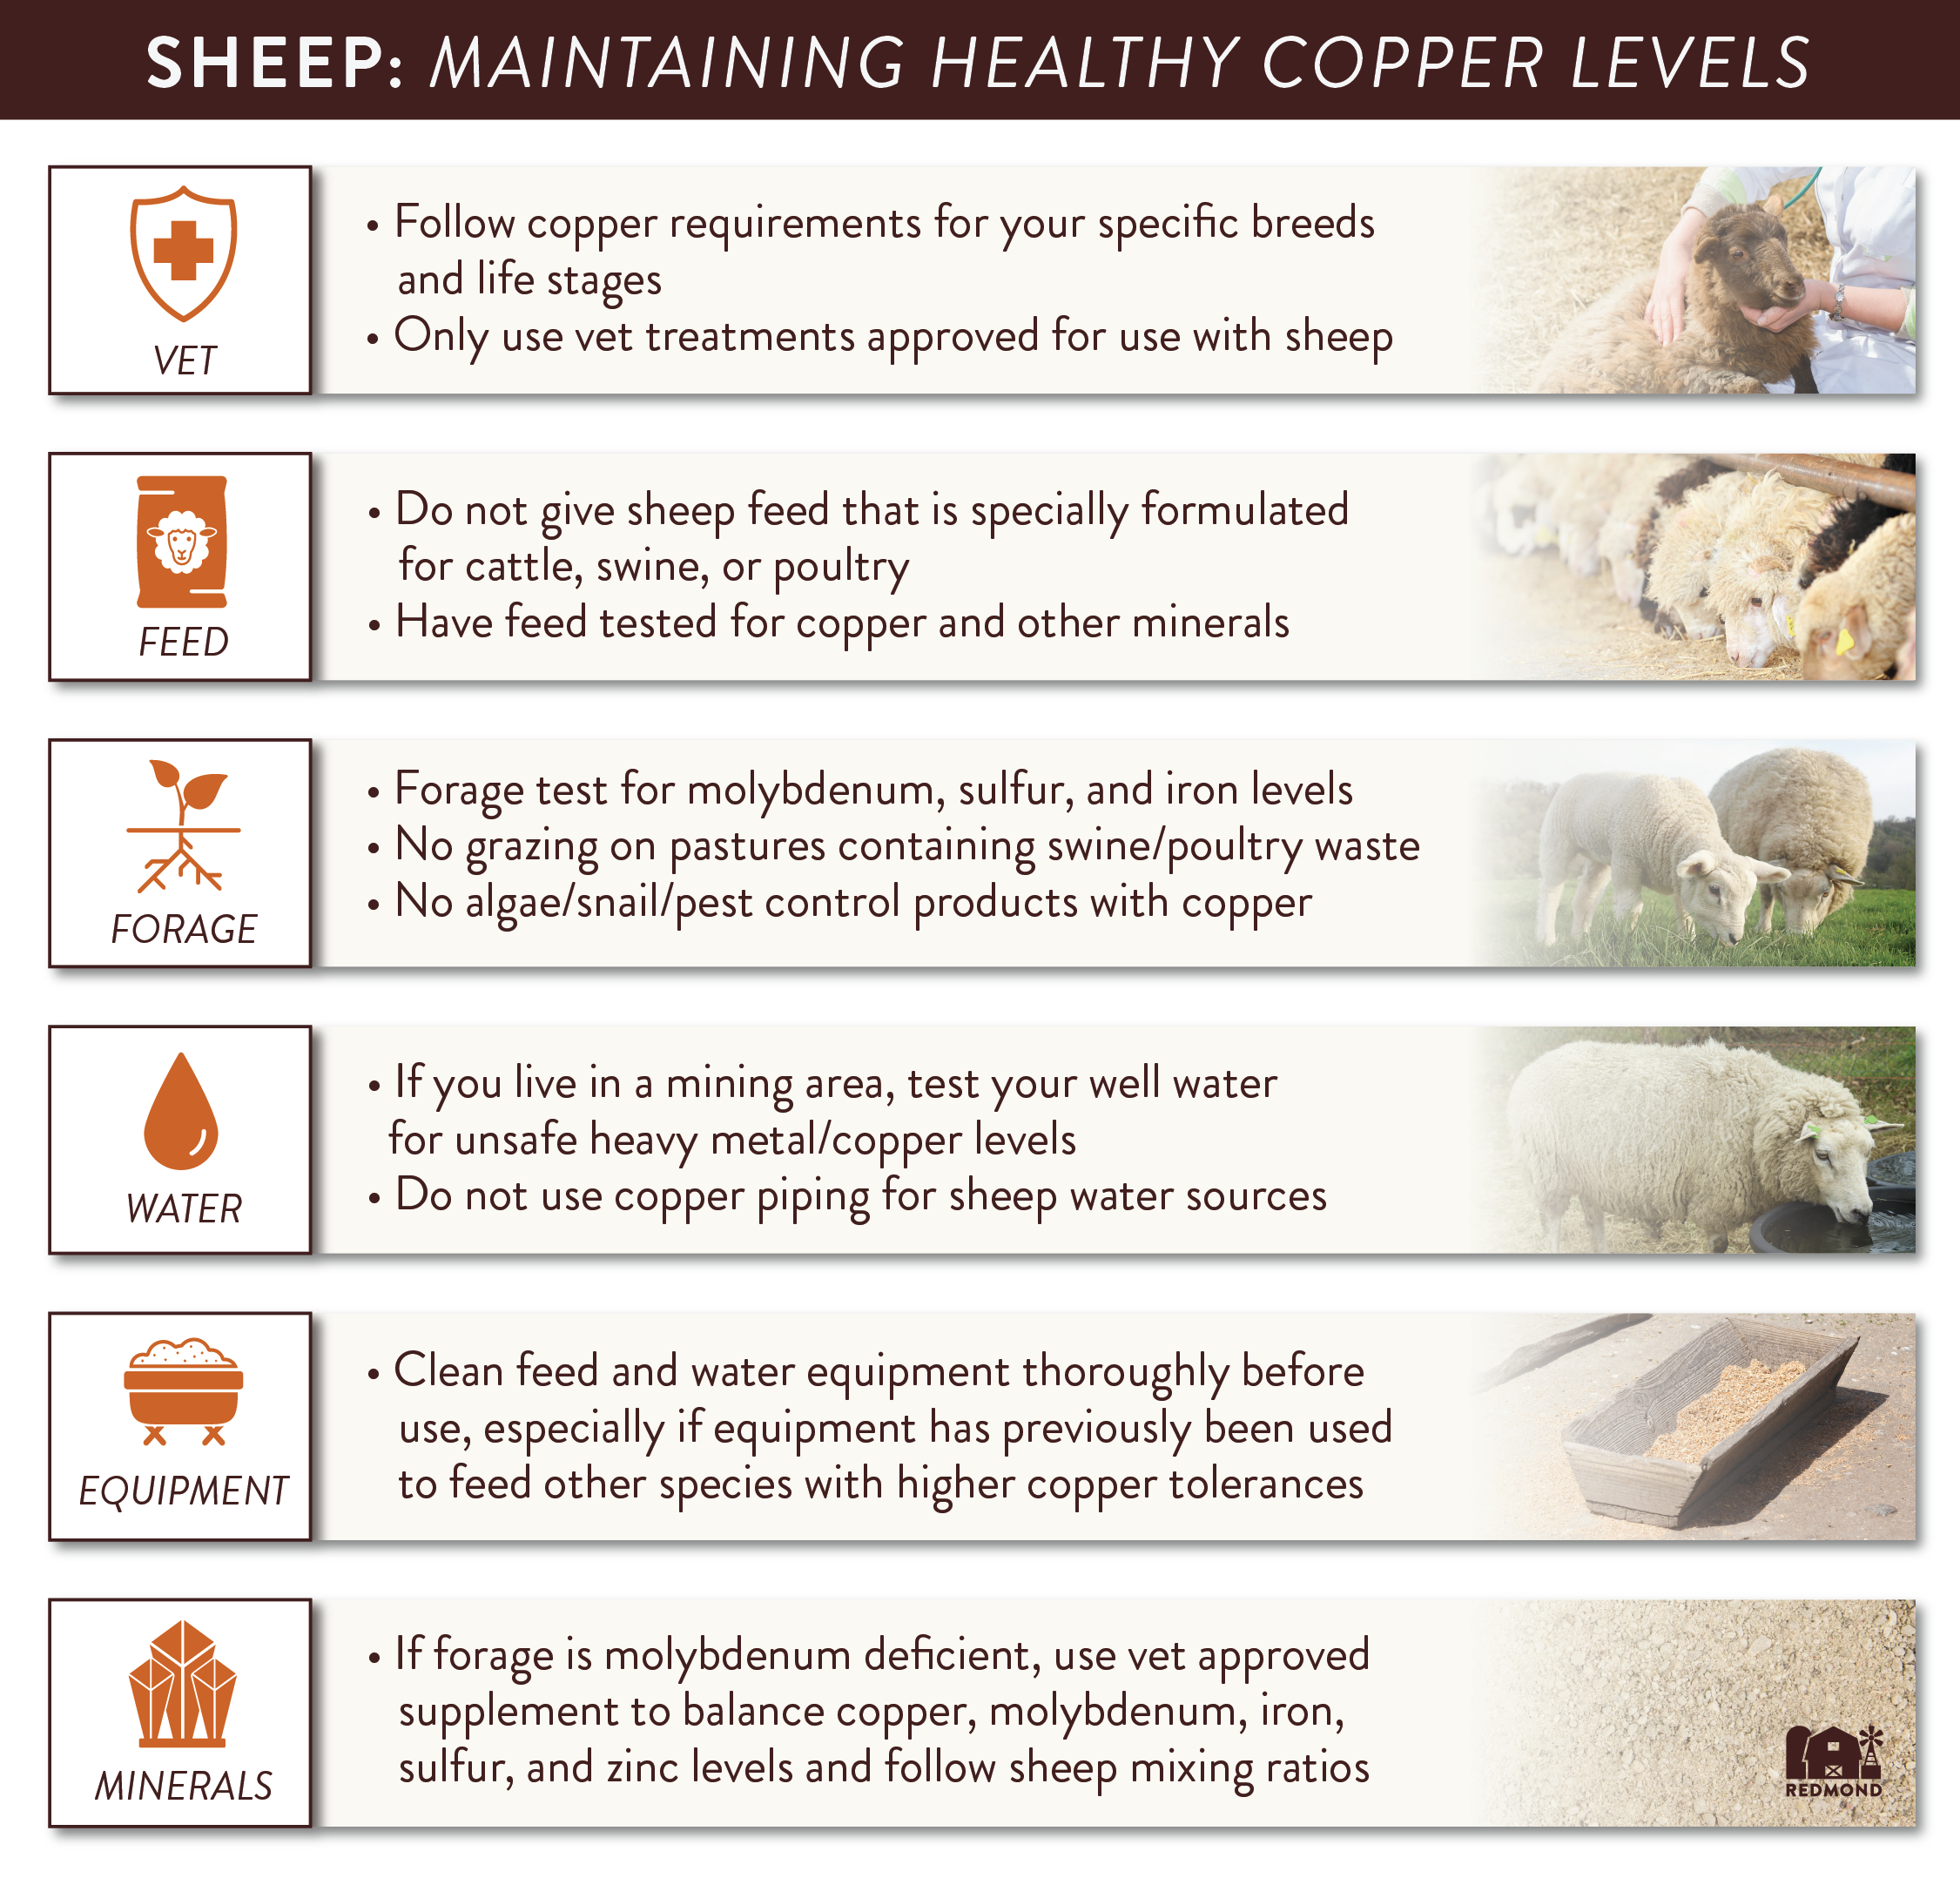 How to prevent copper toxicity in sheep